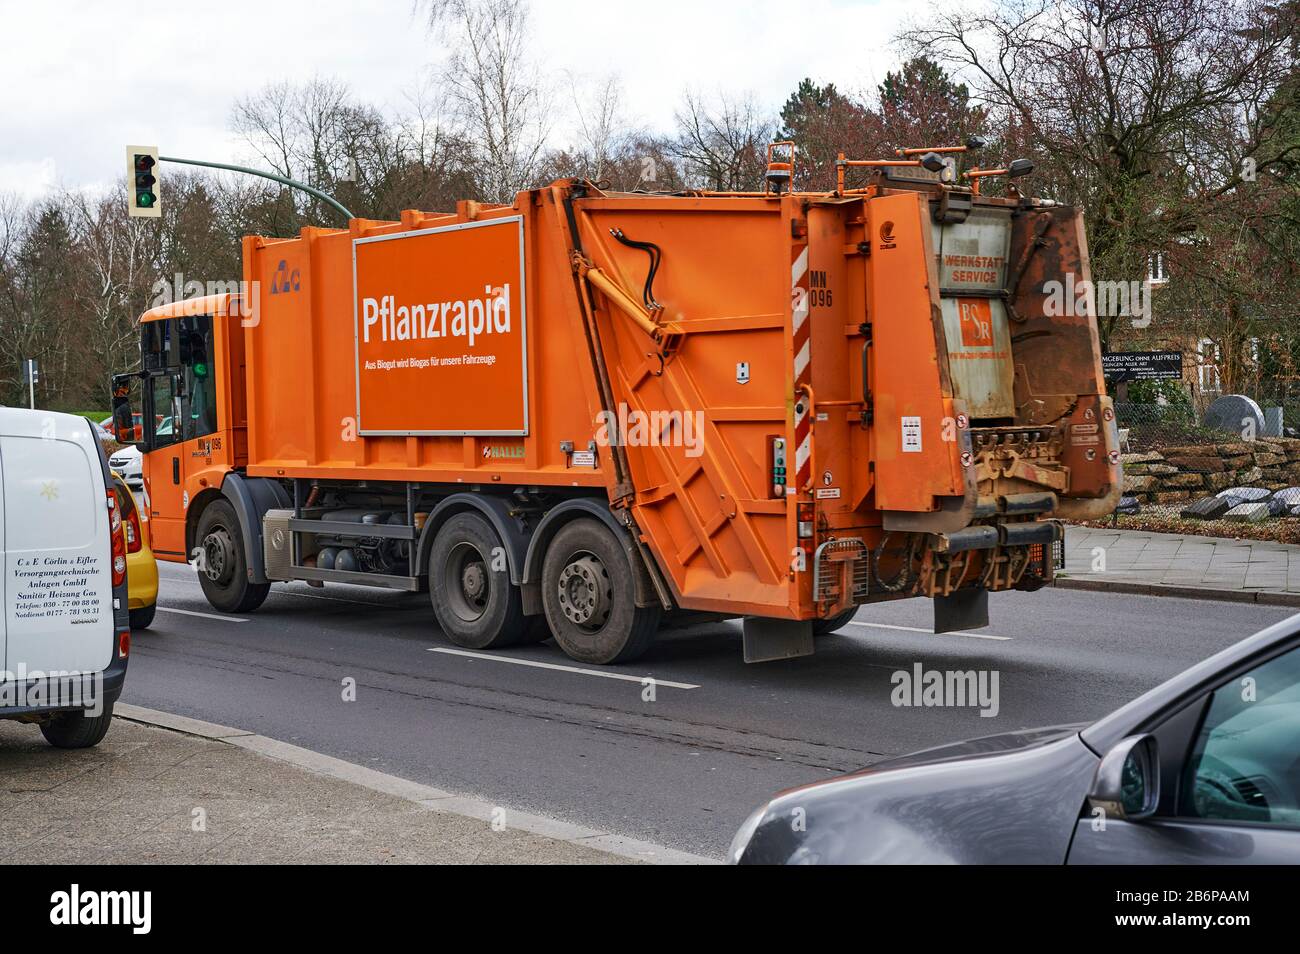 Berlin, Germany - March 11, 2020: Street scene with a truck of the Berlin city cleaning. On the side of the truck you see a sign that humorously adver Stock Photo